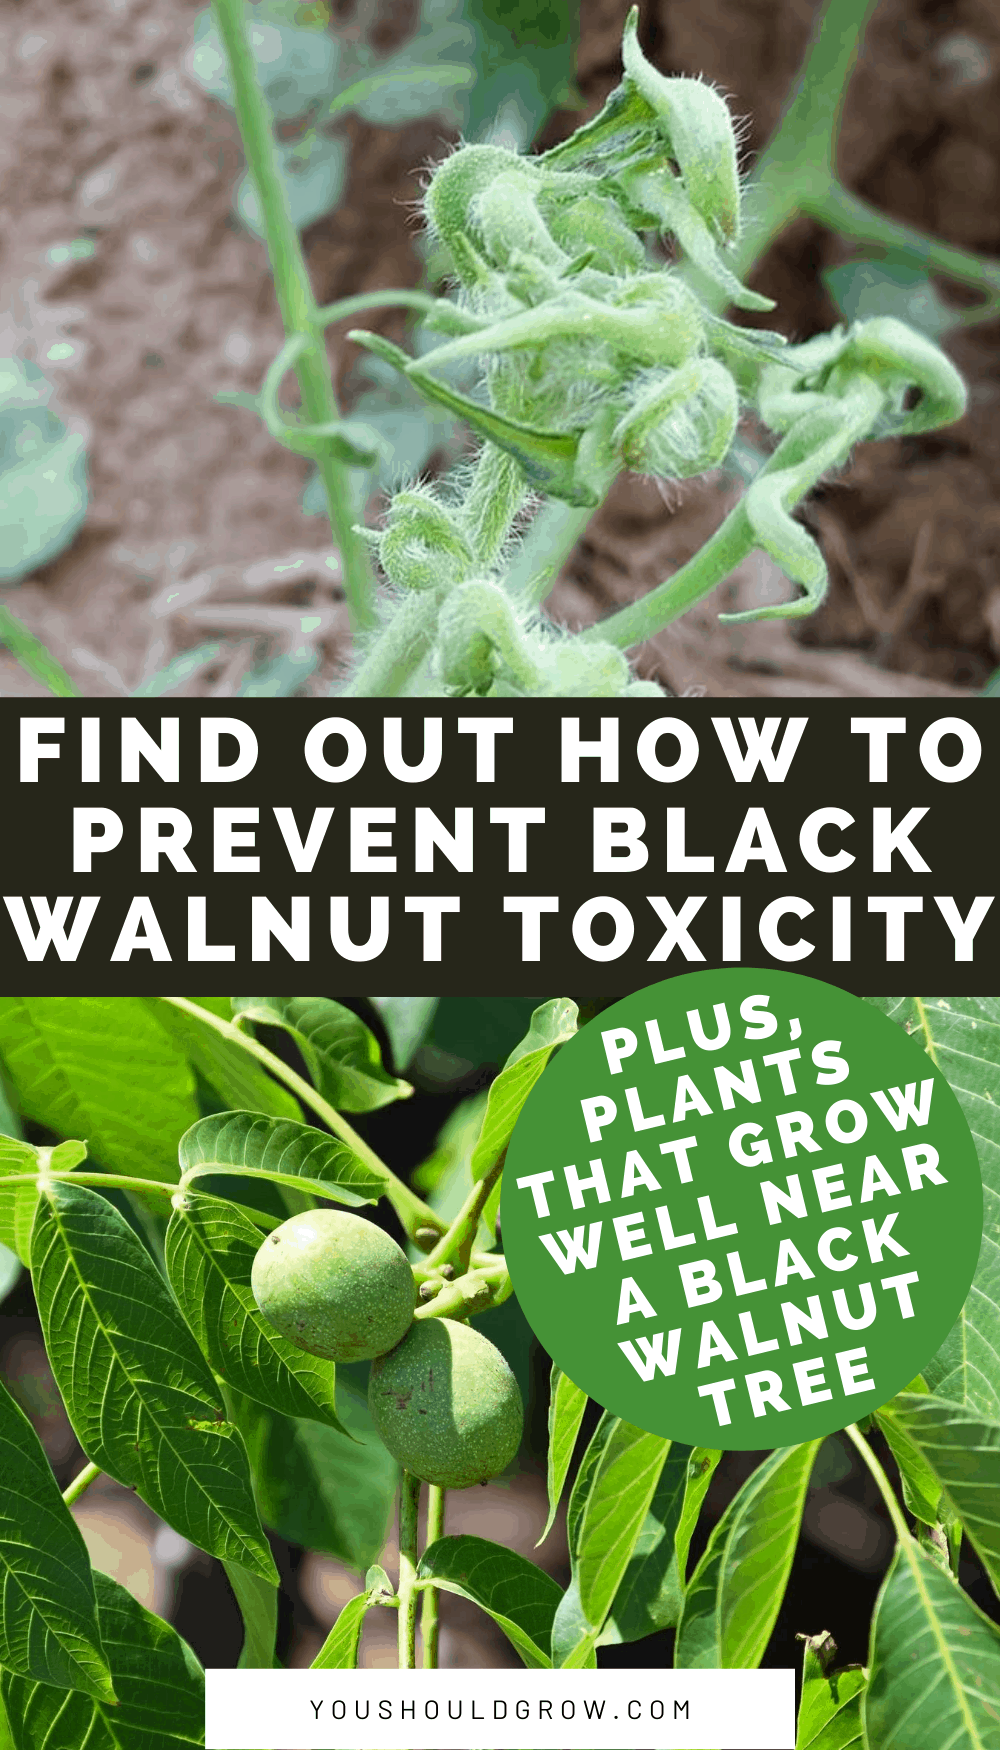 Vegetable gardening near black walnut trees can be disappointing. Black walnut toxicity is a common cause of wilting and death of vegetable plants. Here's what happens and what you can do about it.